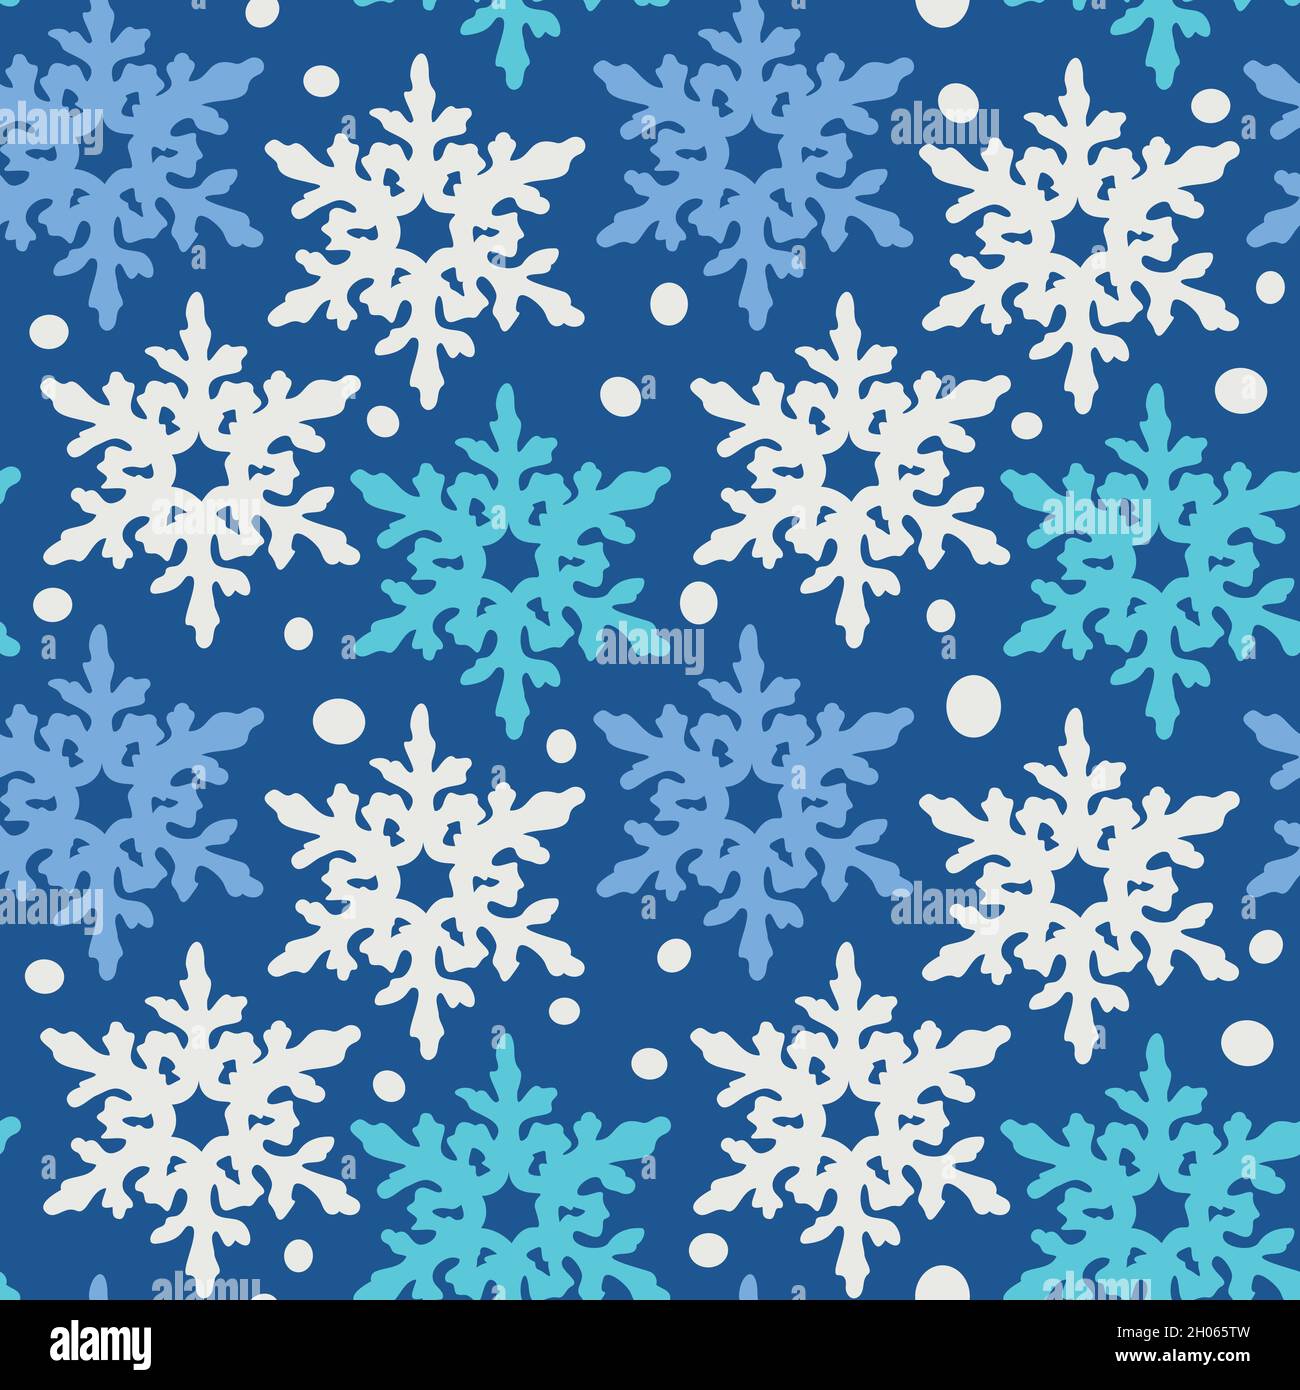 Vector seamless pattern with different colors snowflakes. Contrast design. Stock Vector